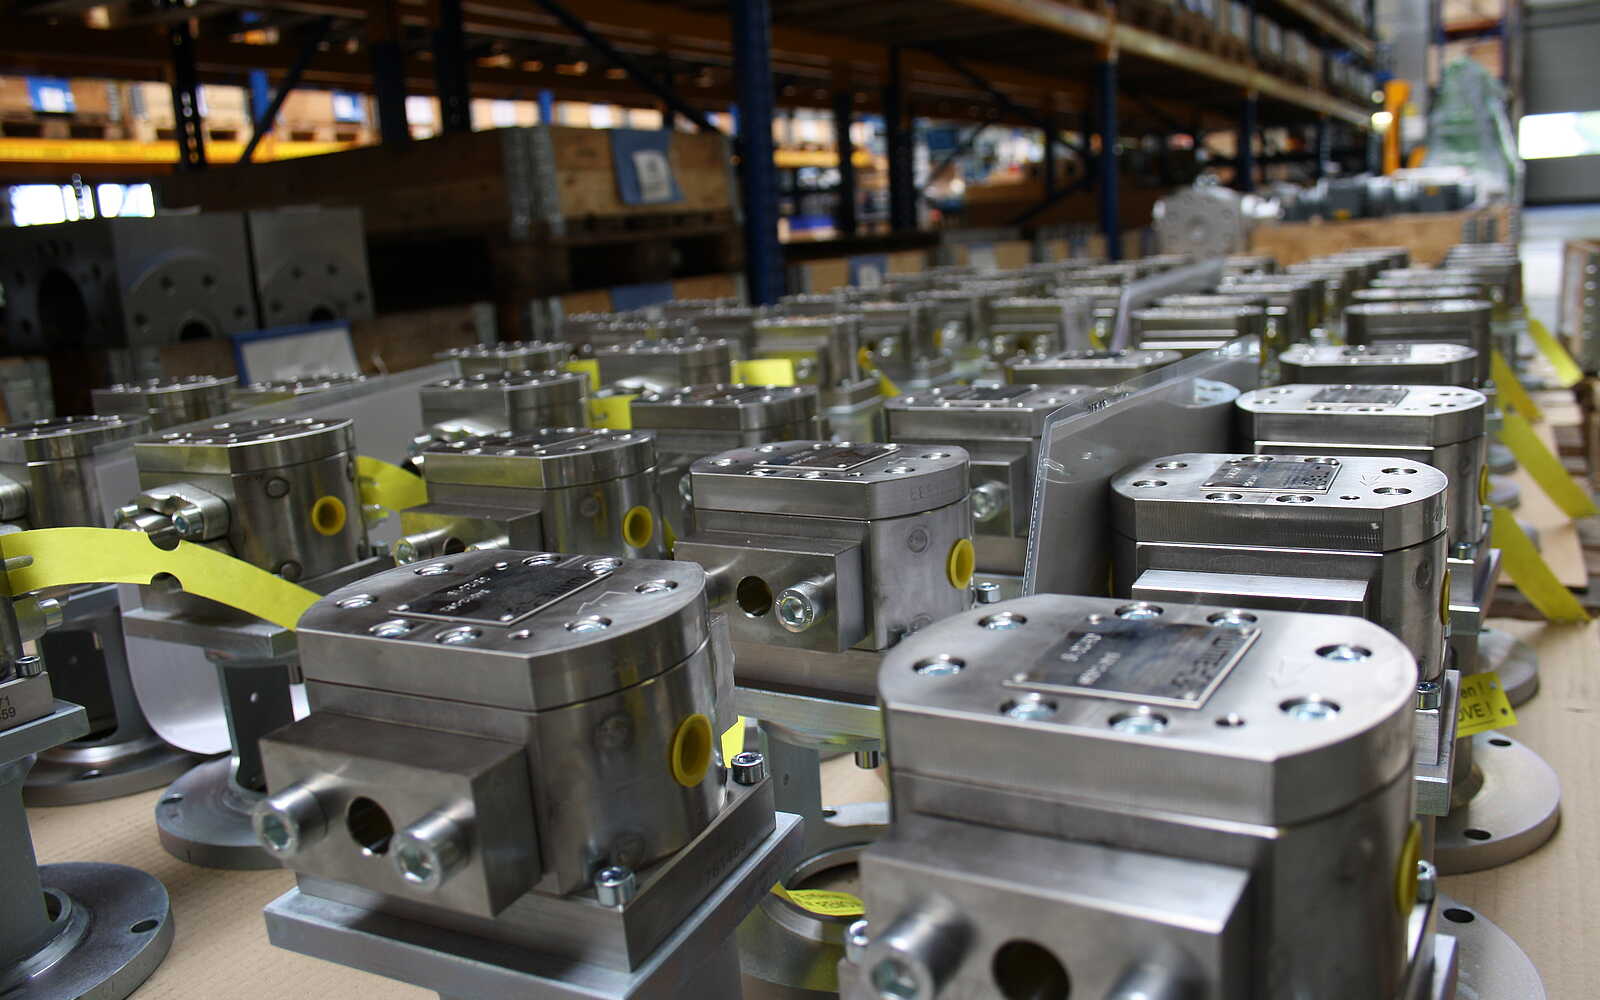 [Translate to English:] Chemical gear pump stainless steel housing